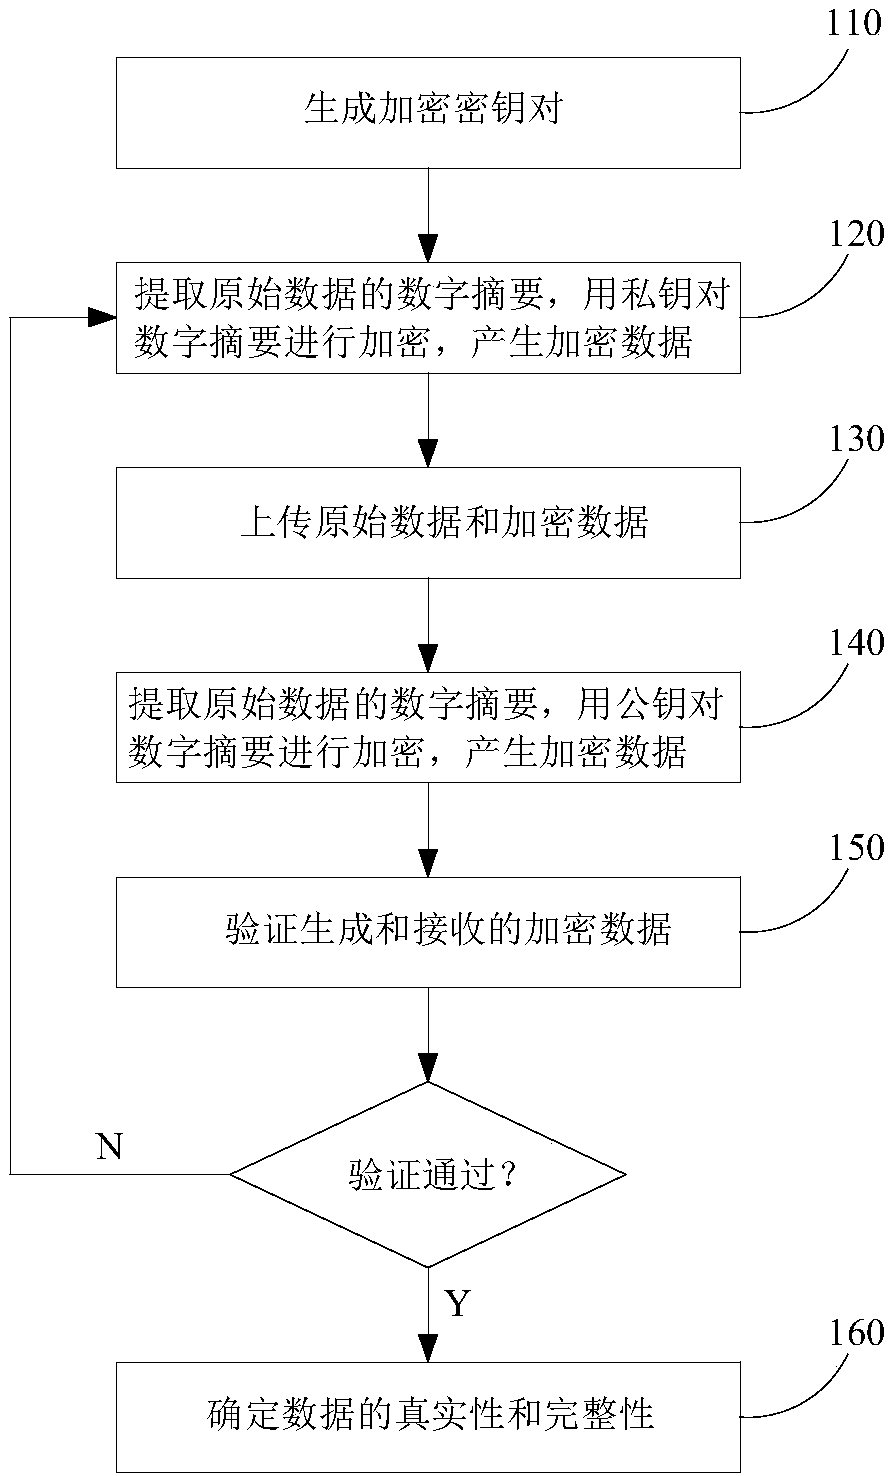 Tamper-proof encryption implementation method and device in batch data uploading process